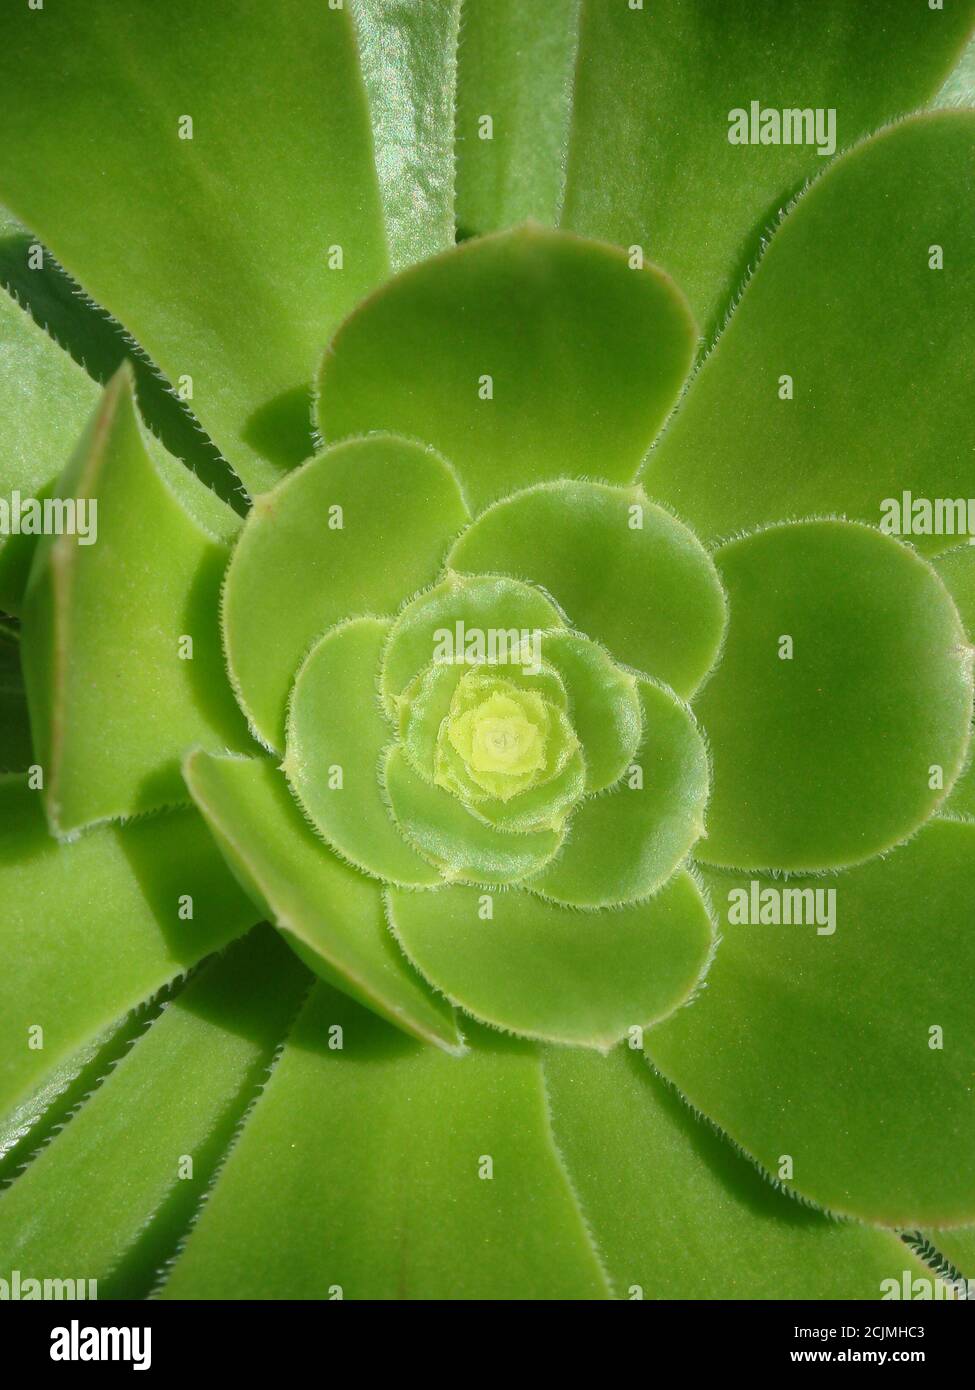 Close-up of Bejeque flower rosette also known as Aeonium canariense, a succulent robust plant native to Canary Islands, growing on hillsides Stock Photo